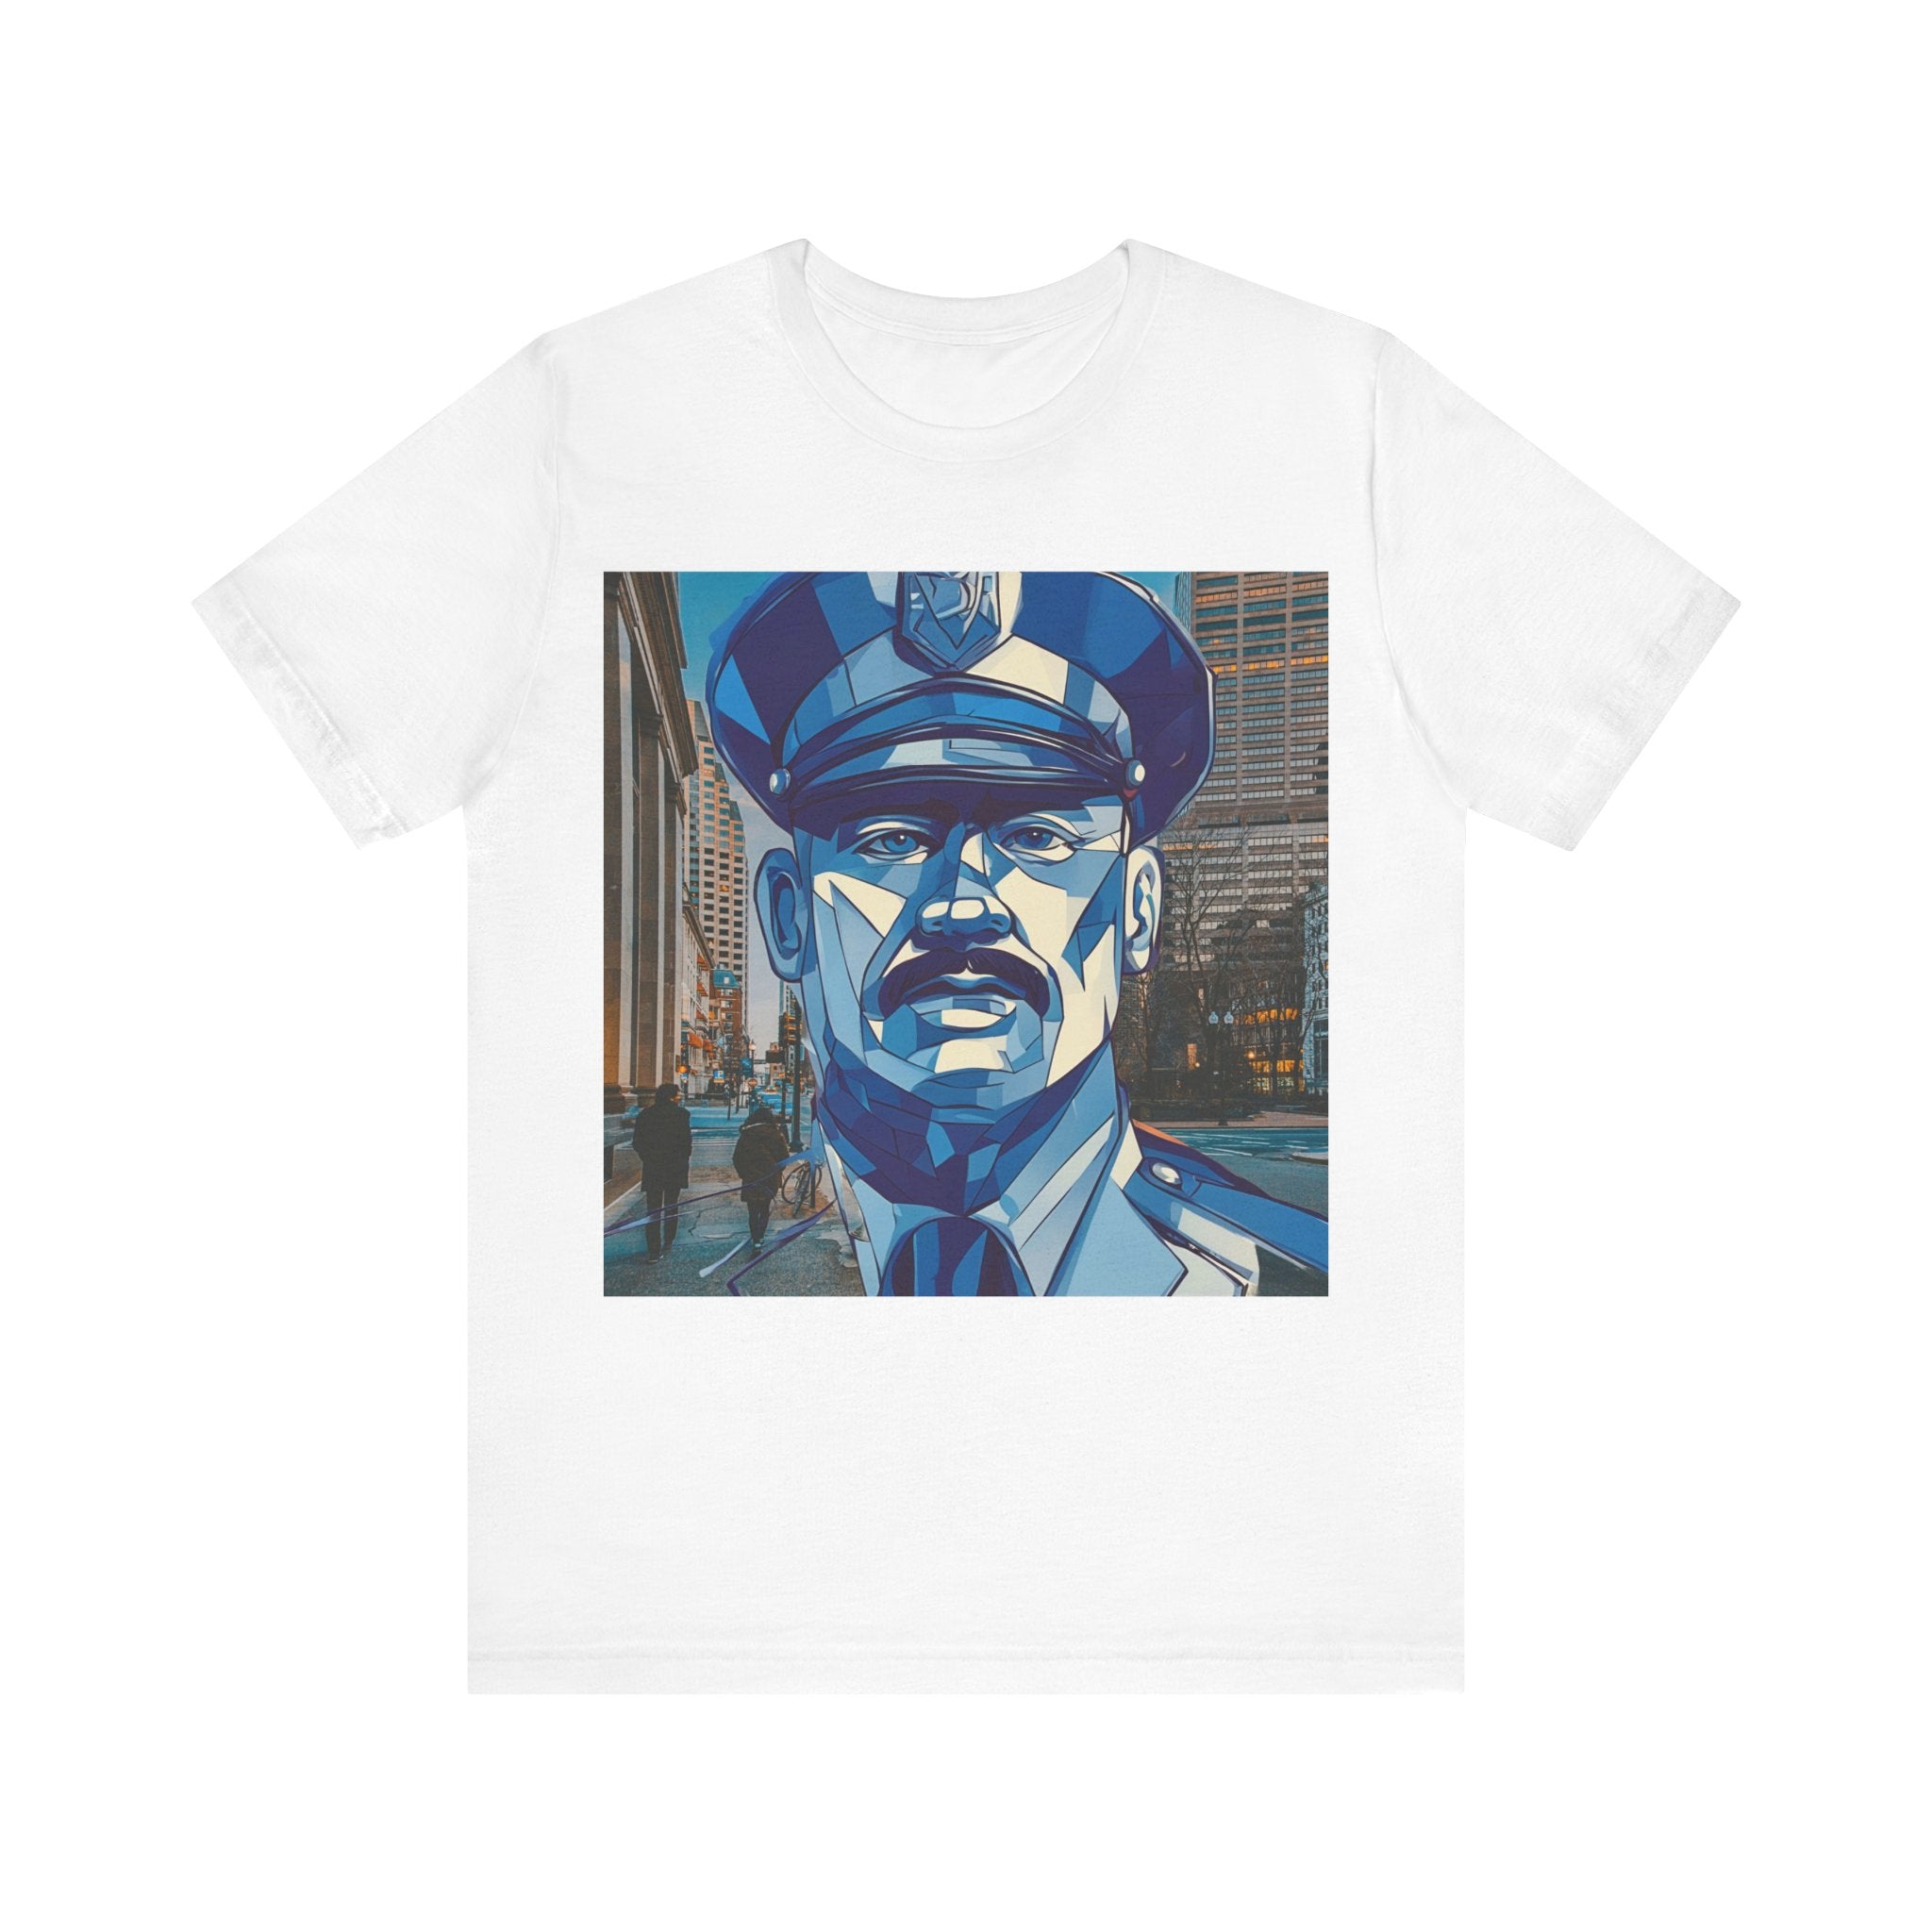 T-Shirt POLICEMAN Original Design Unisex Adult Sizes Show Friend Love Fun Gift Beauty Jersey Tee Like Art Fit People Style Work Home Party